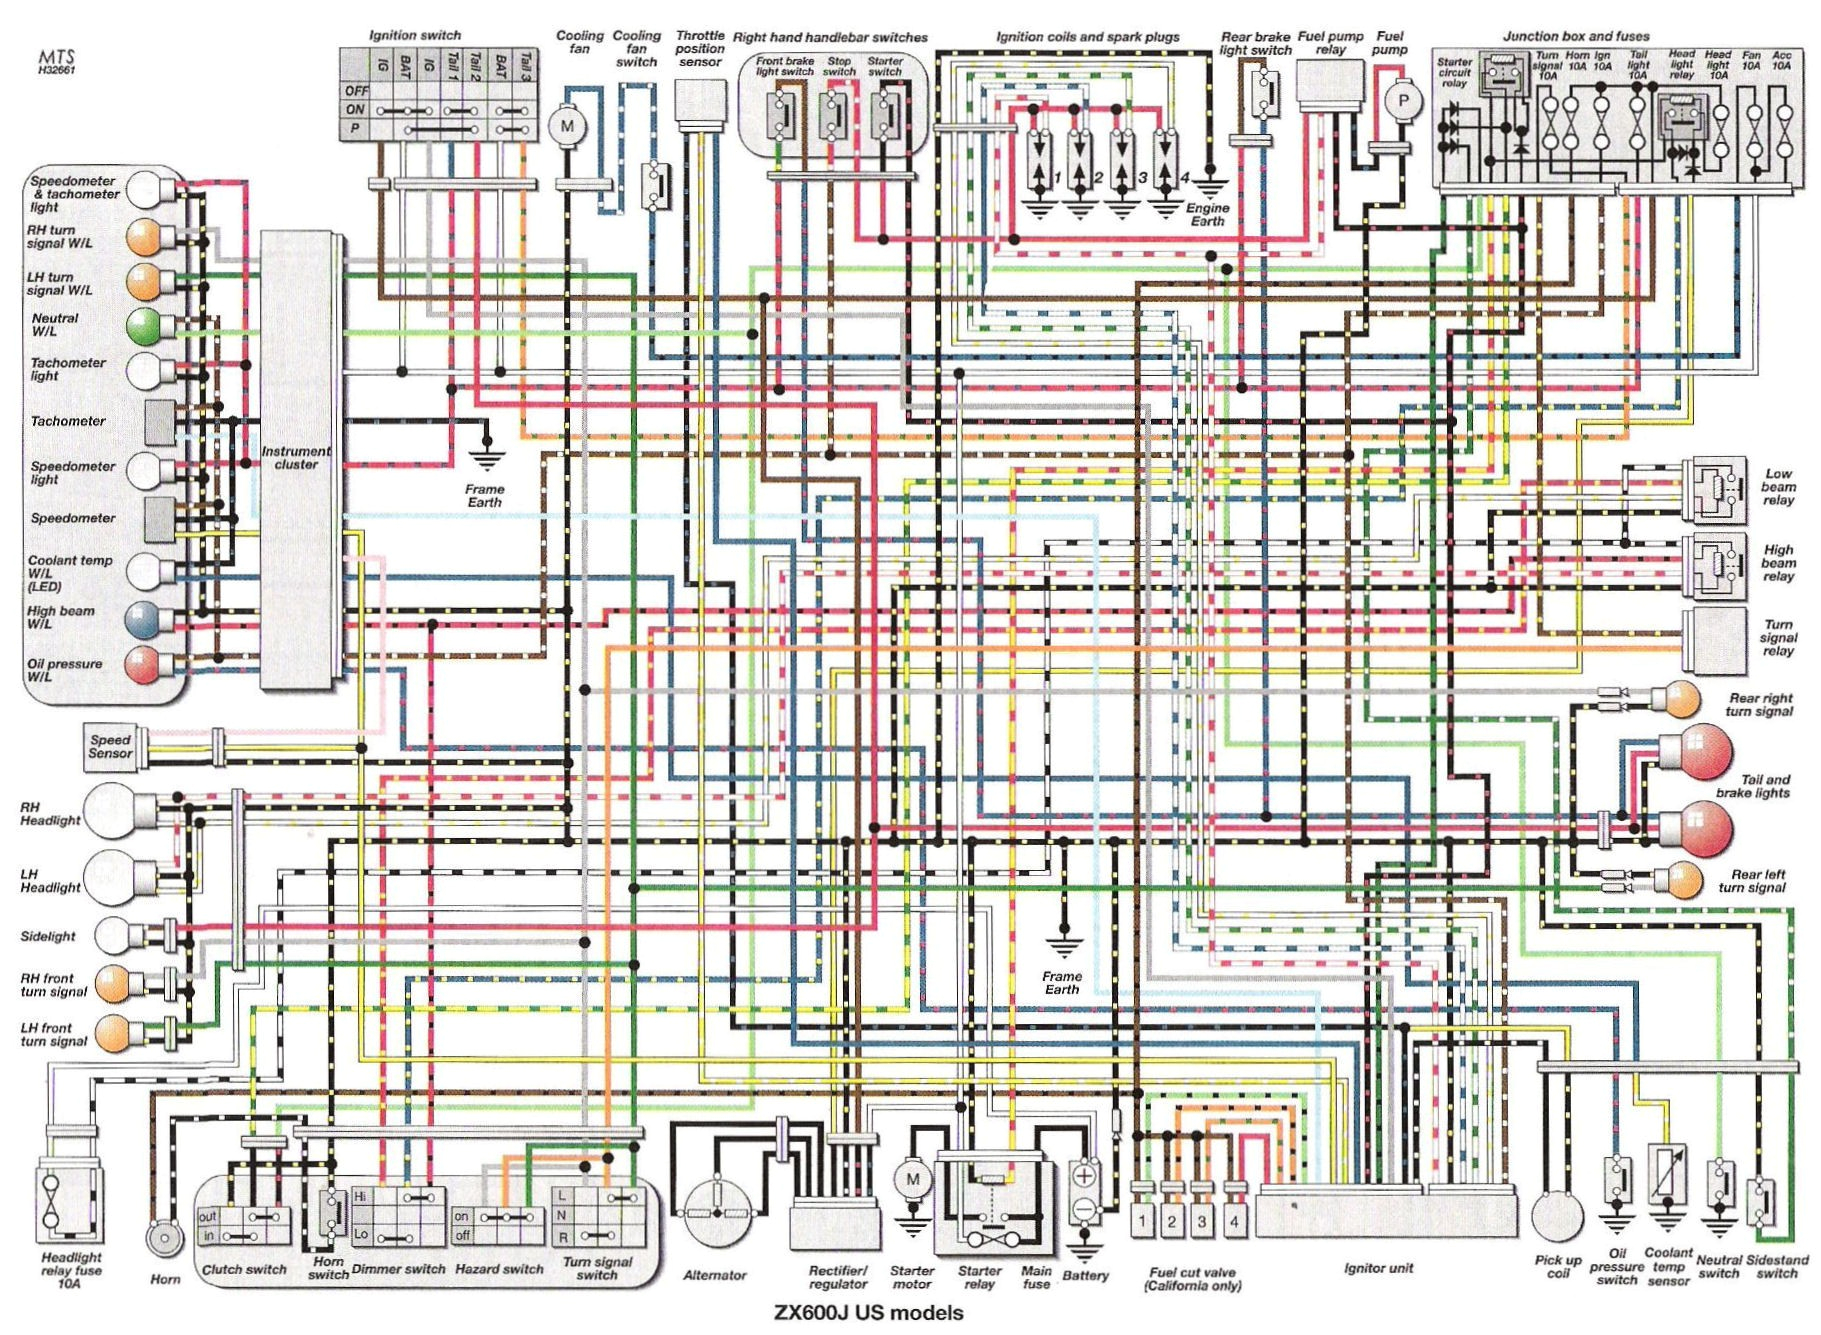 zx10 wiring diagram extended wiring diagram wiring harness diagram for 2006 kawasaki zx10r